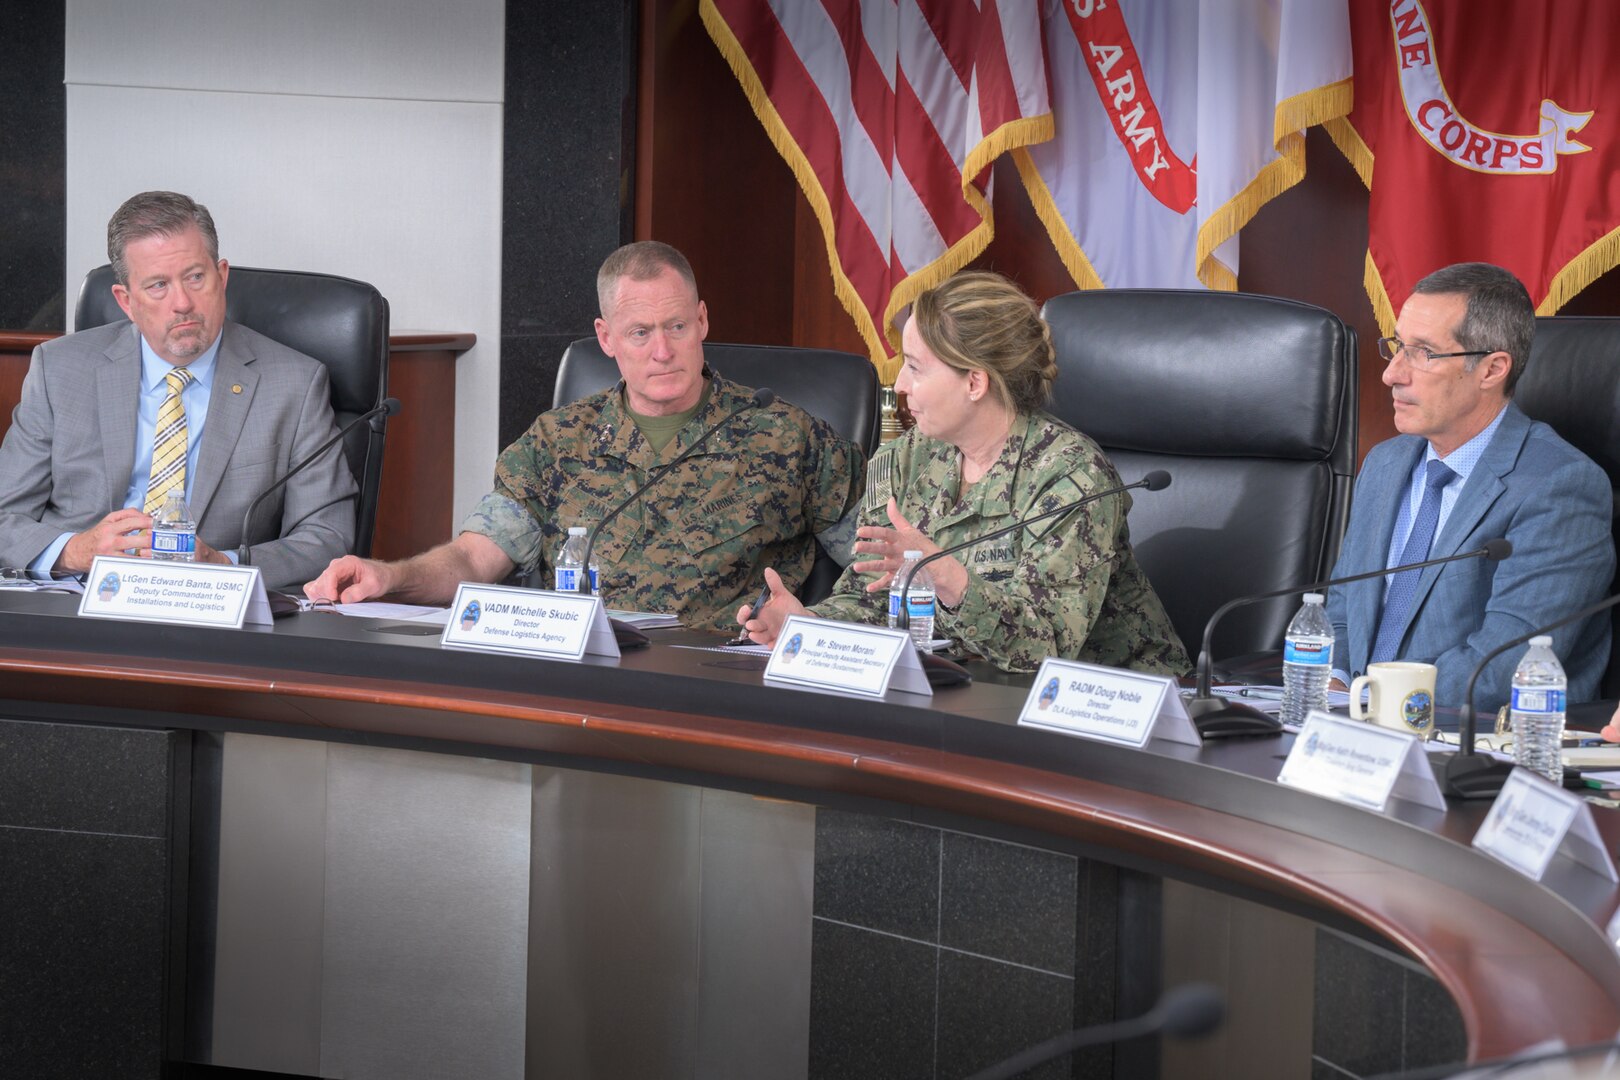 Senior military officials discuss DLA and Marine Corps issues during Marine Corps-DLA Day